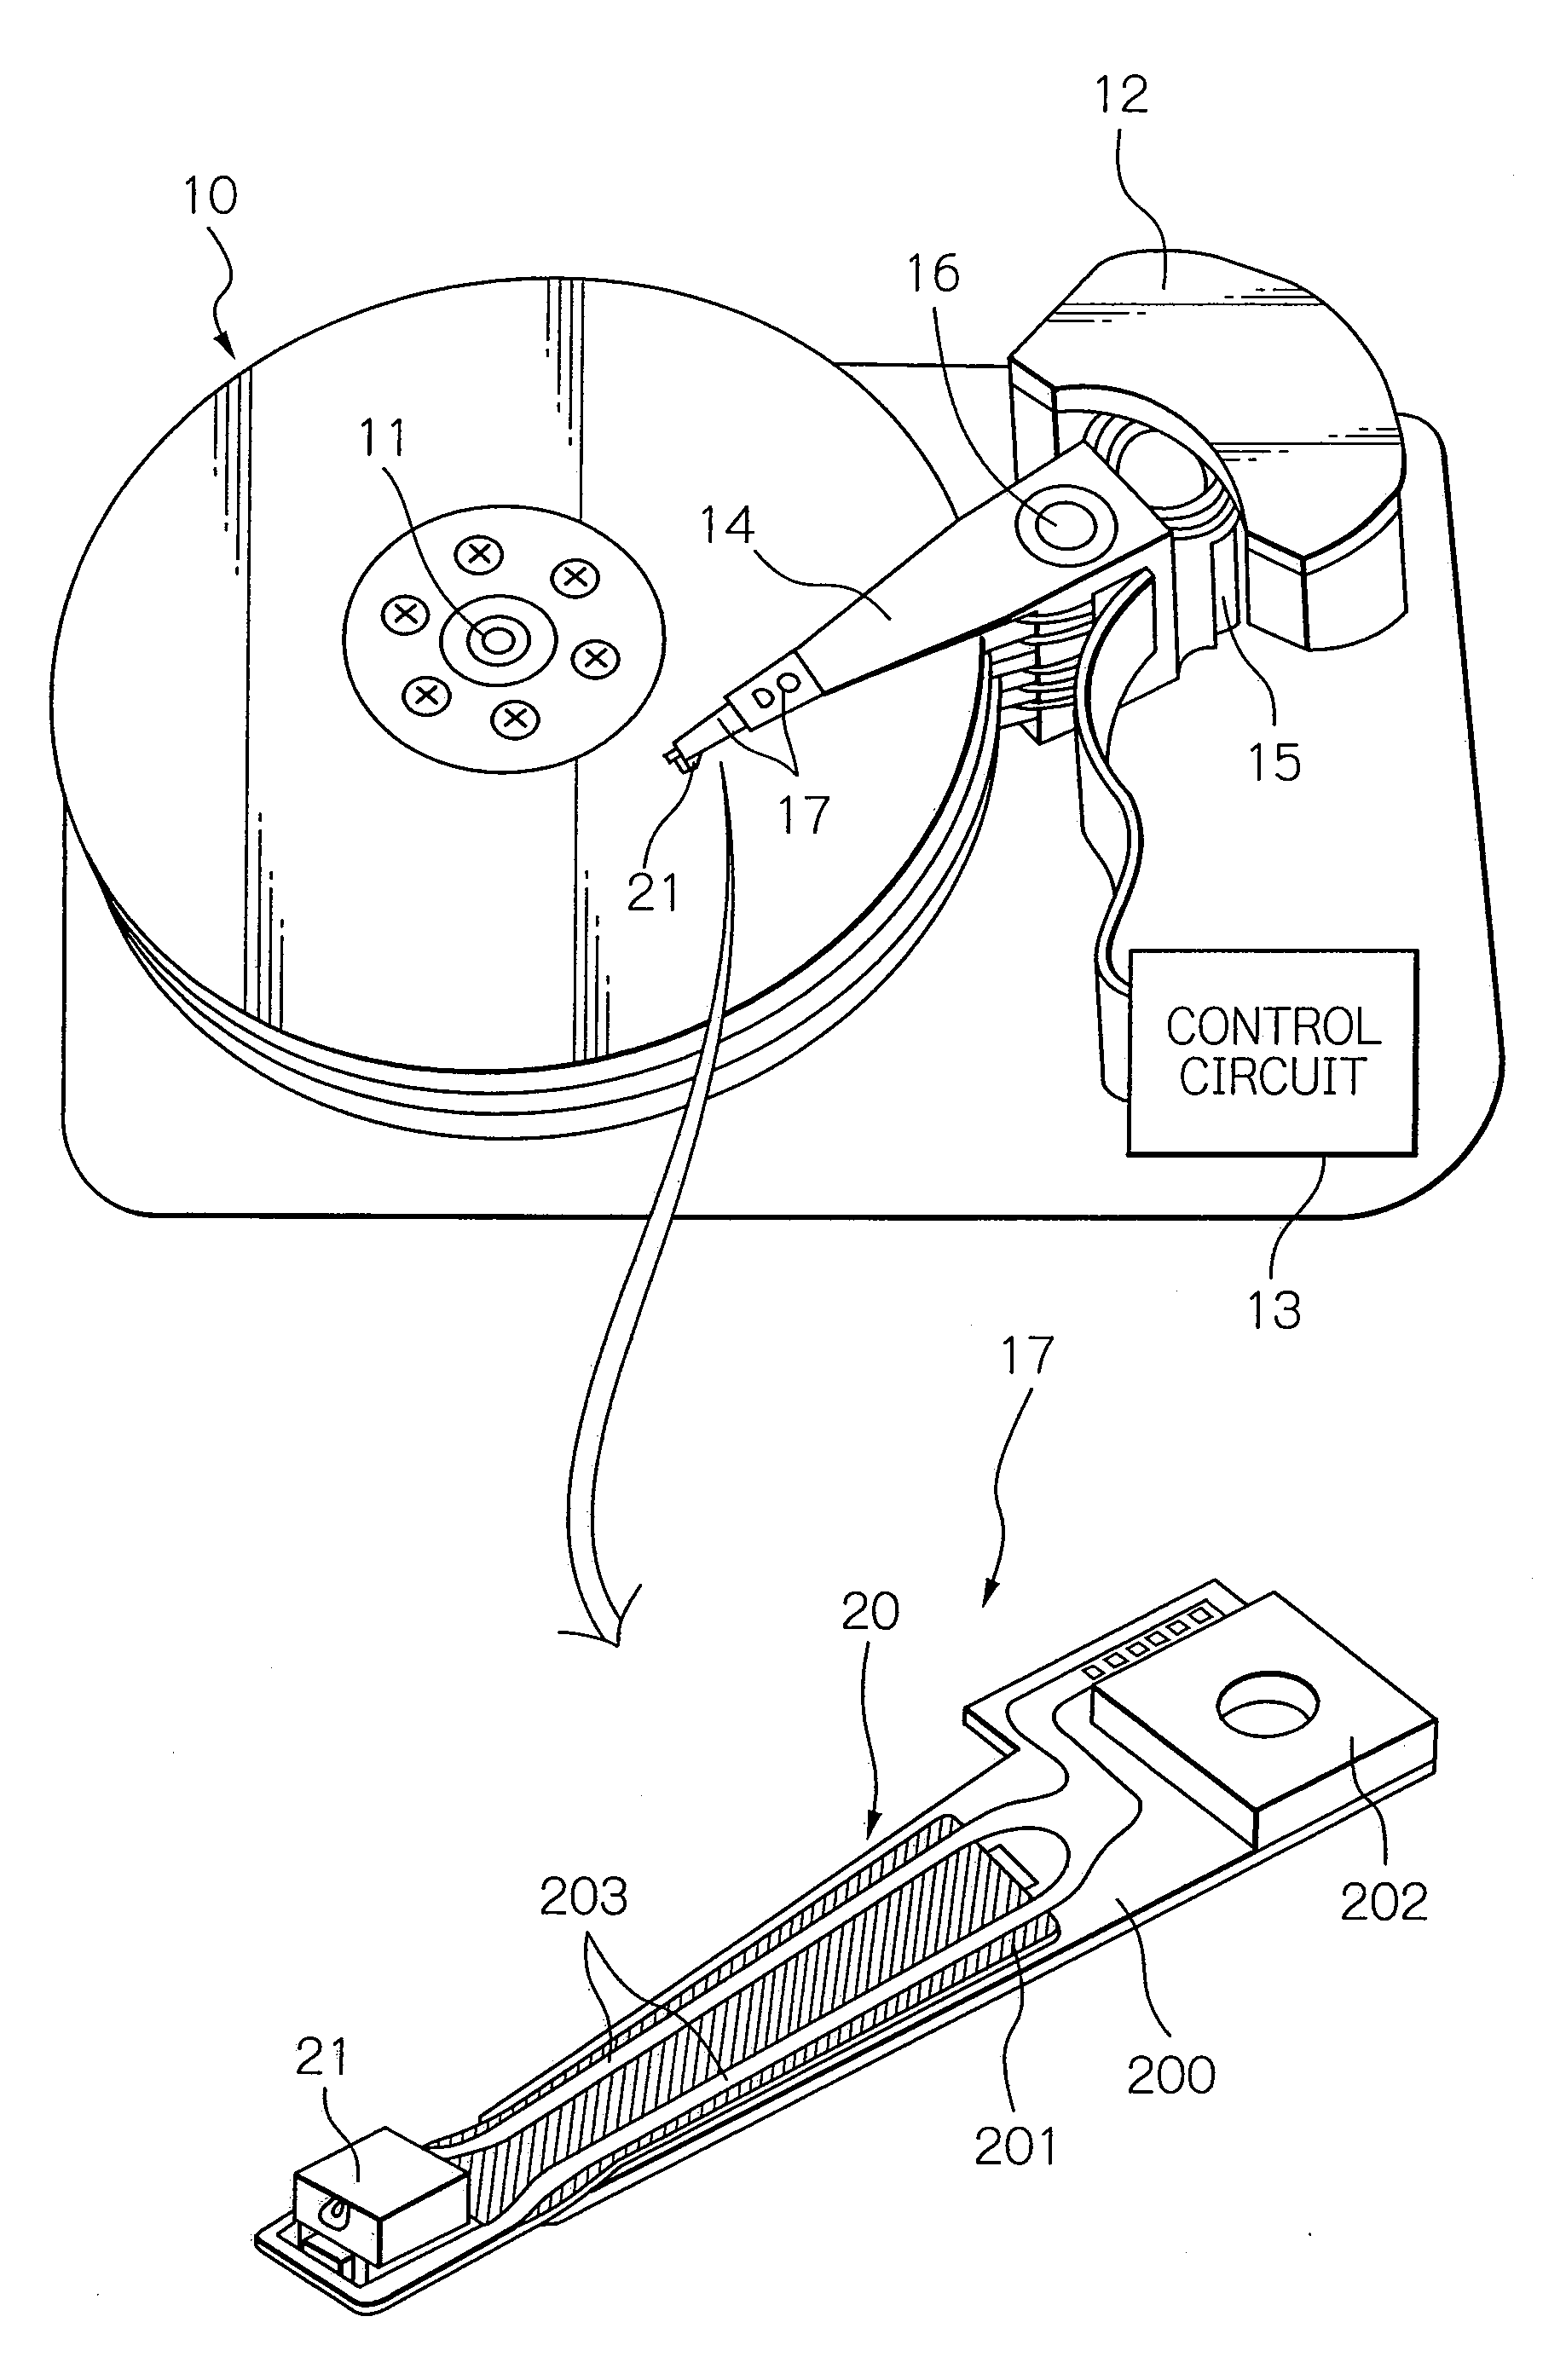 Surface plasmon antenna with propagation edge and near-field light generating element